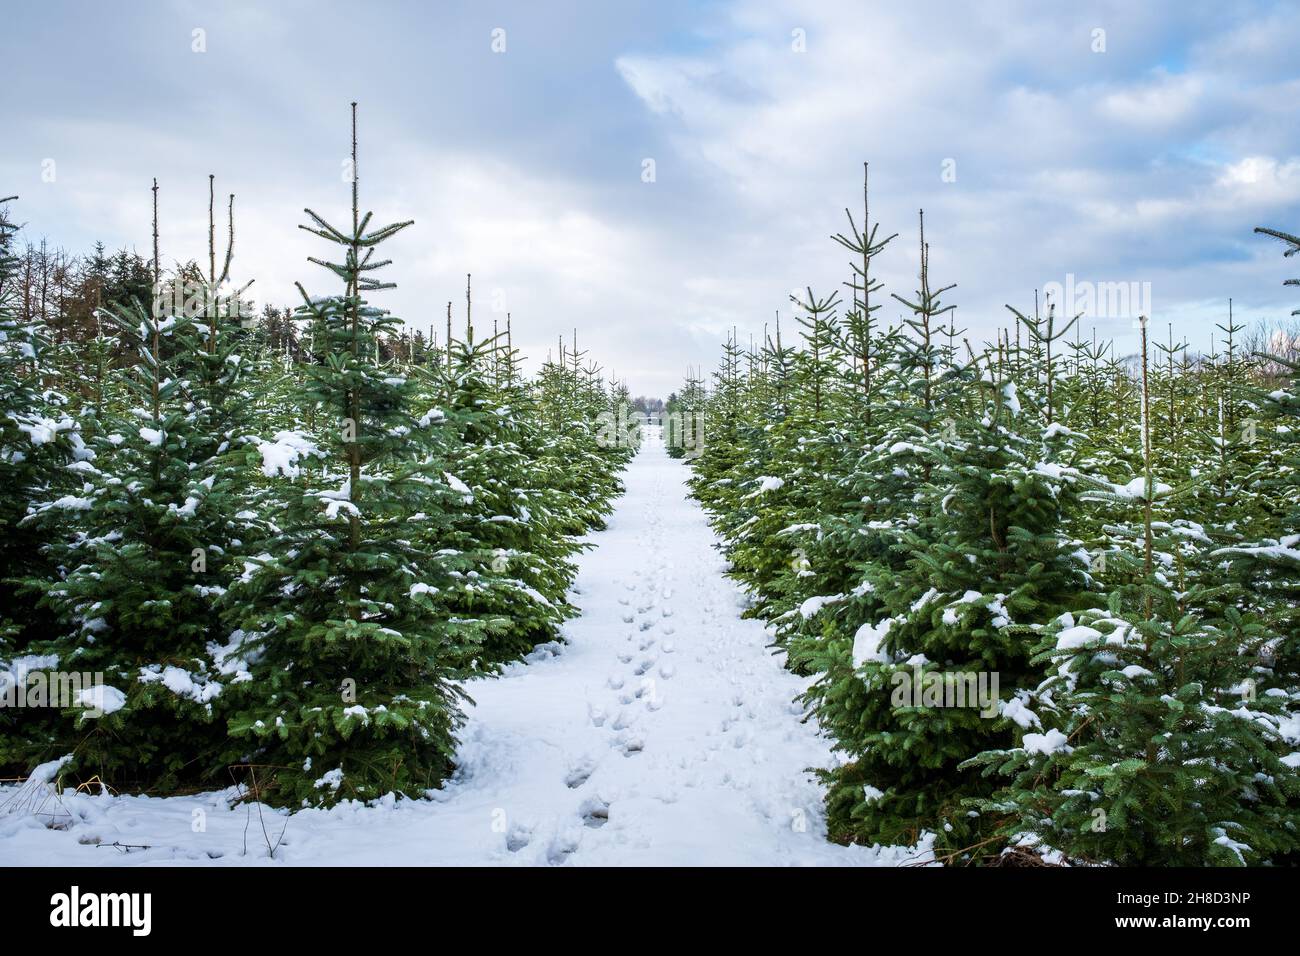 Winter landscape background. A footpath with footprints leads through a tree nursery with small and large snow-covered fir trees. Christmas tree farm Stock Photo